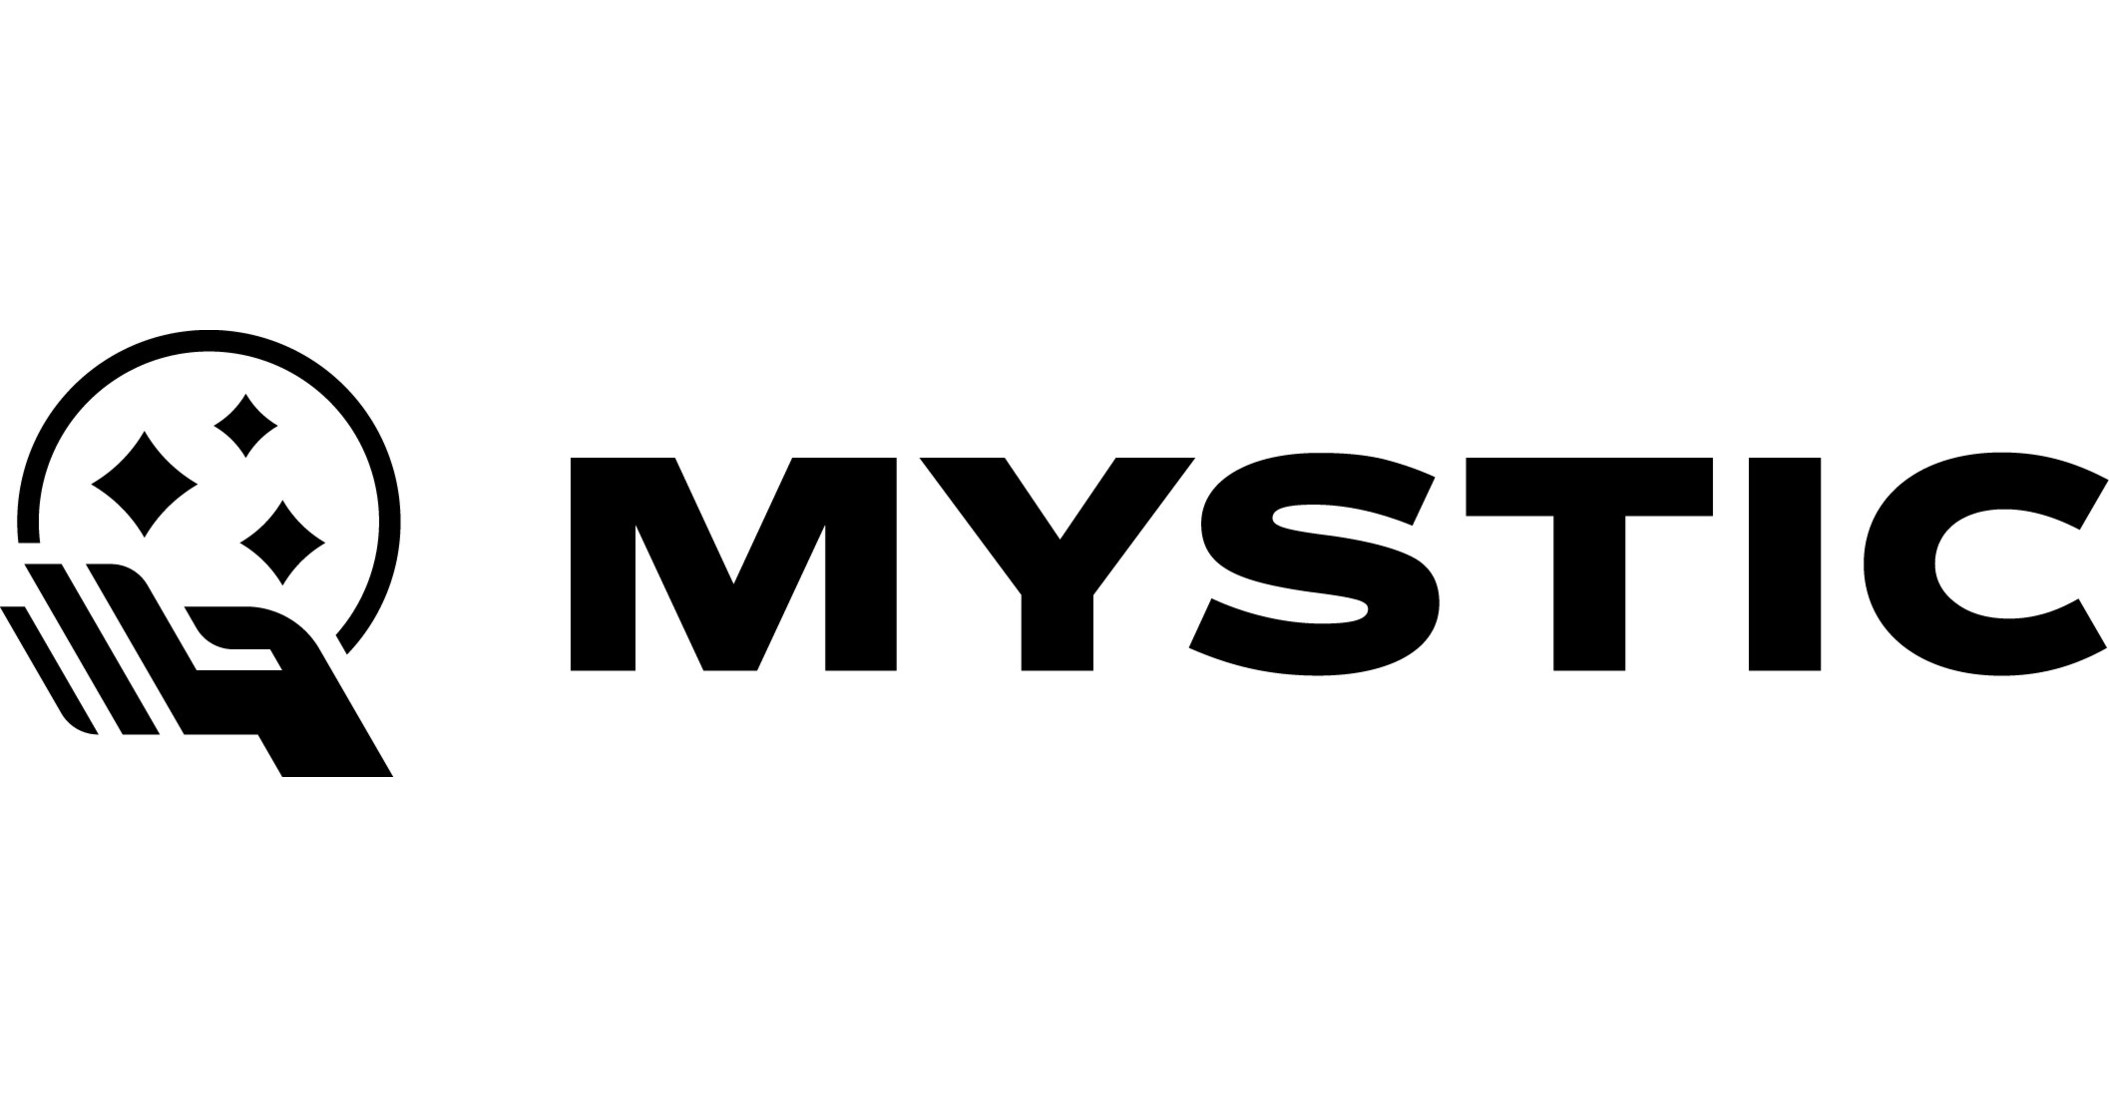 Mystic.com Launches With Goal of Demystifying Web3 and the Metaverse